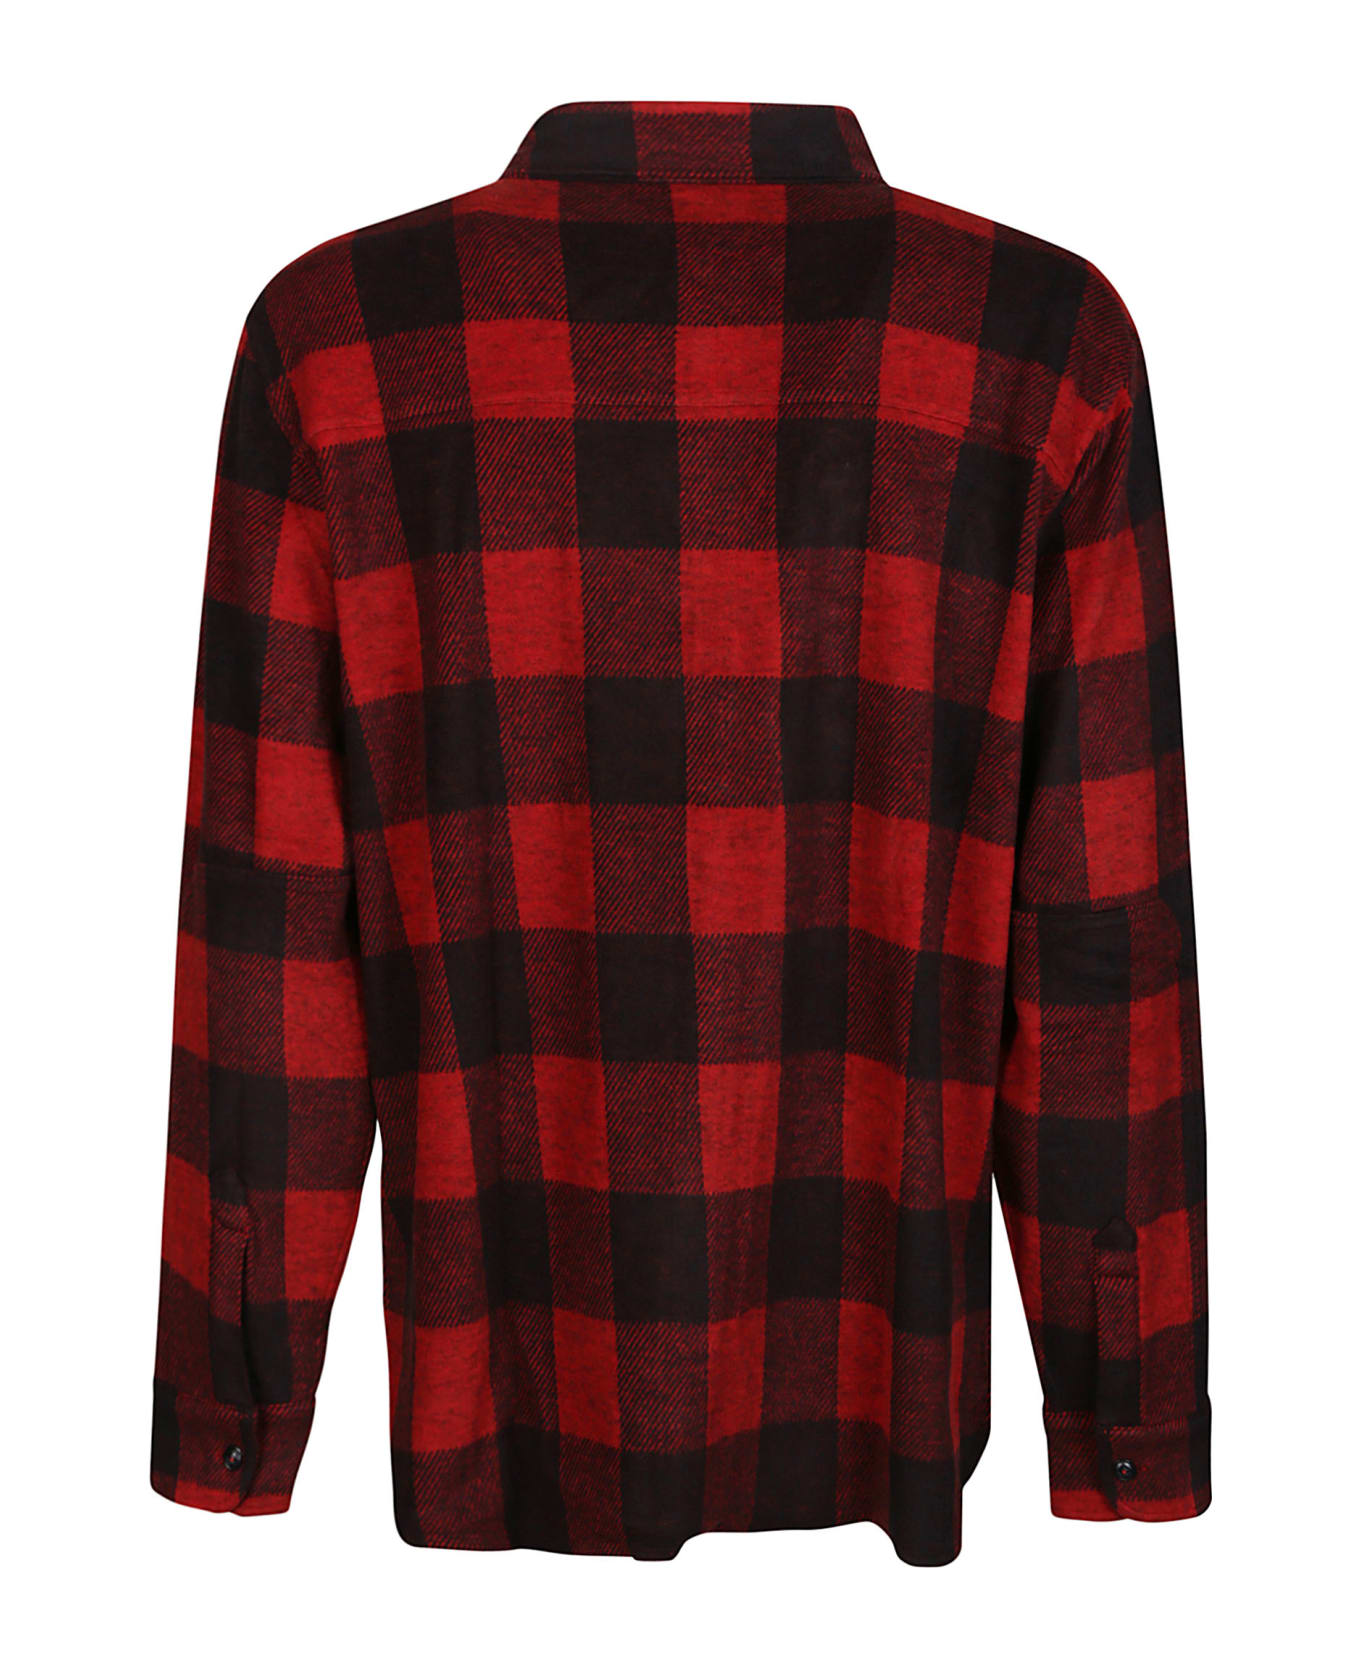 Polo Ralph Lauren Red Checked Shirt - Red